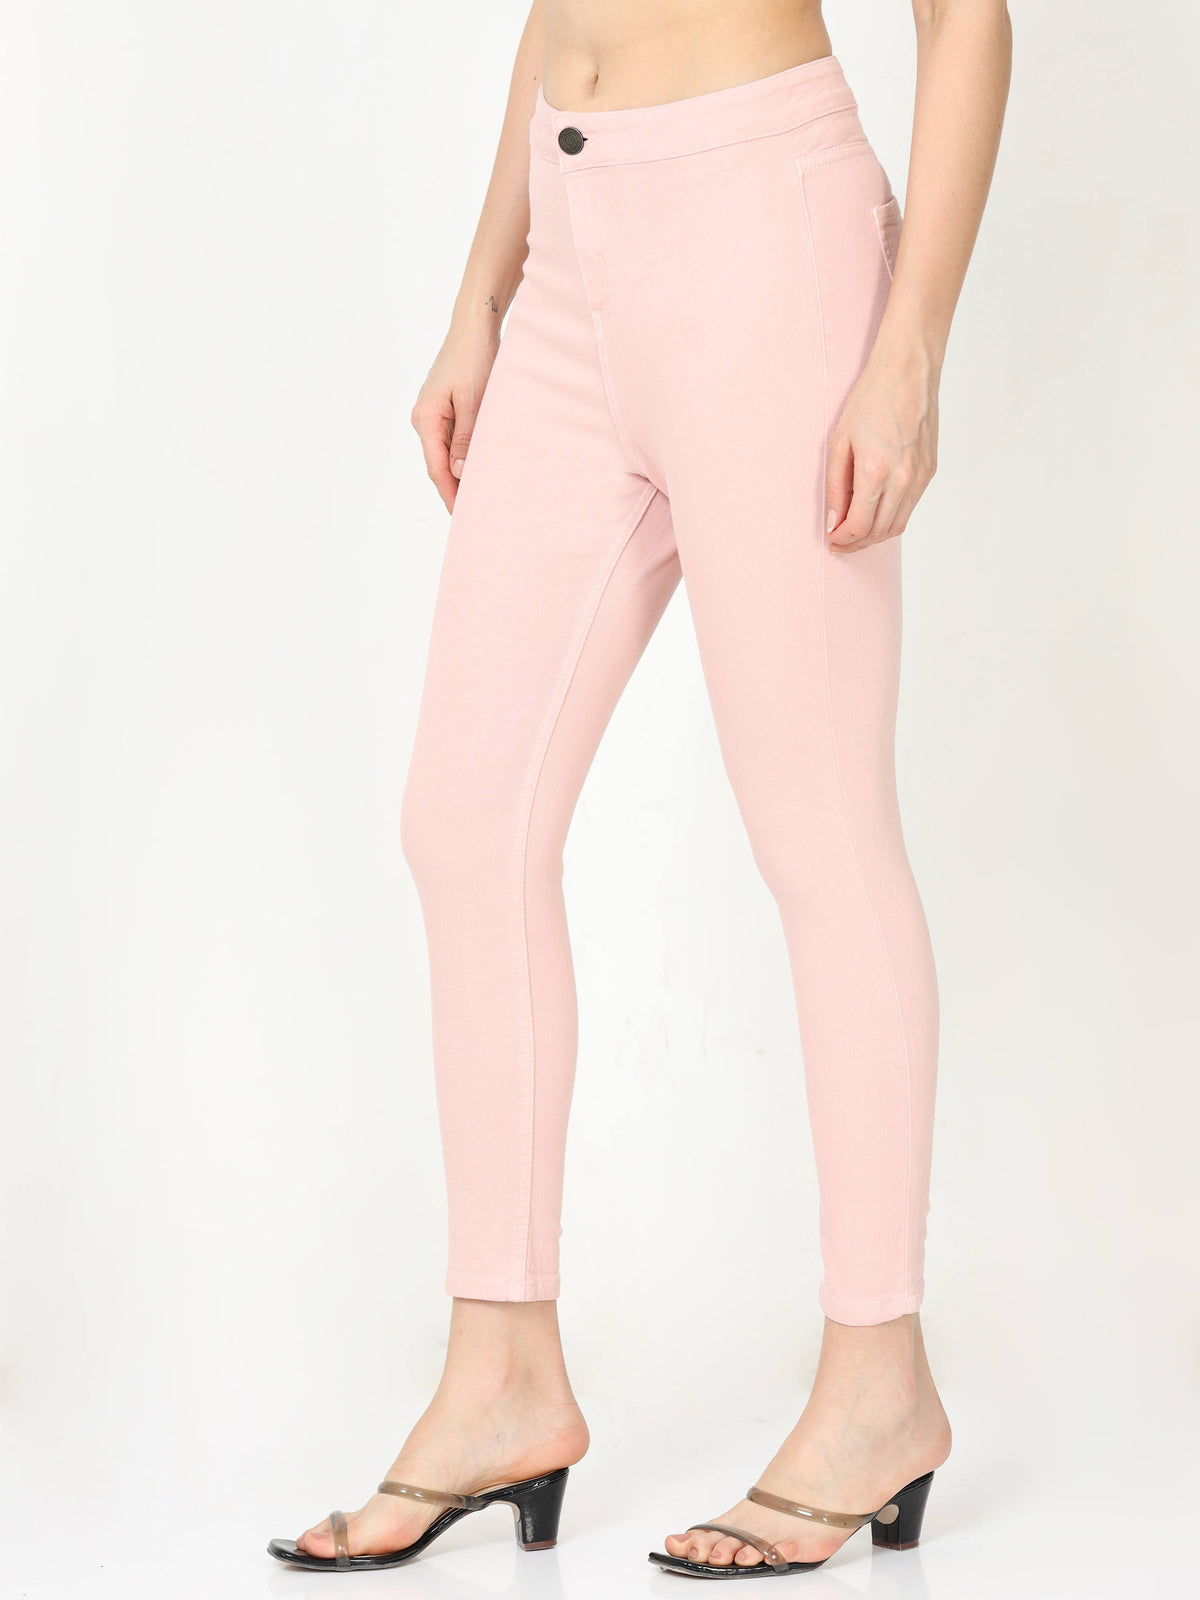 Skinny Baby Pink High Waist Jeans Ankle Fit